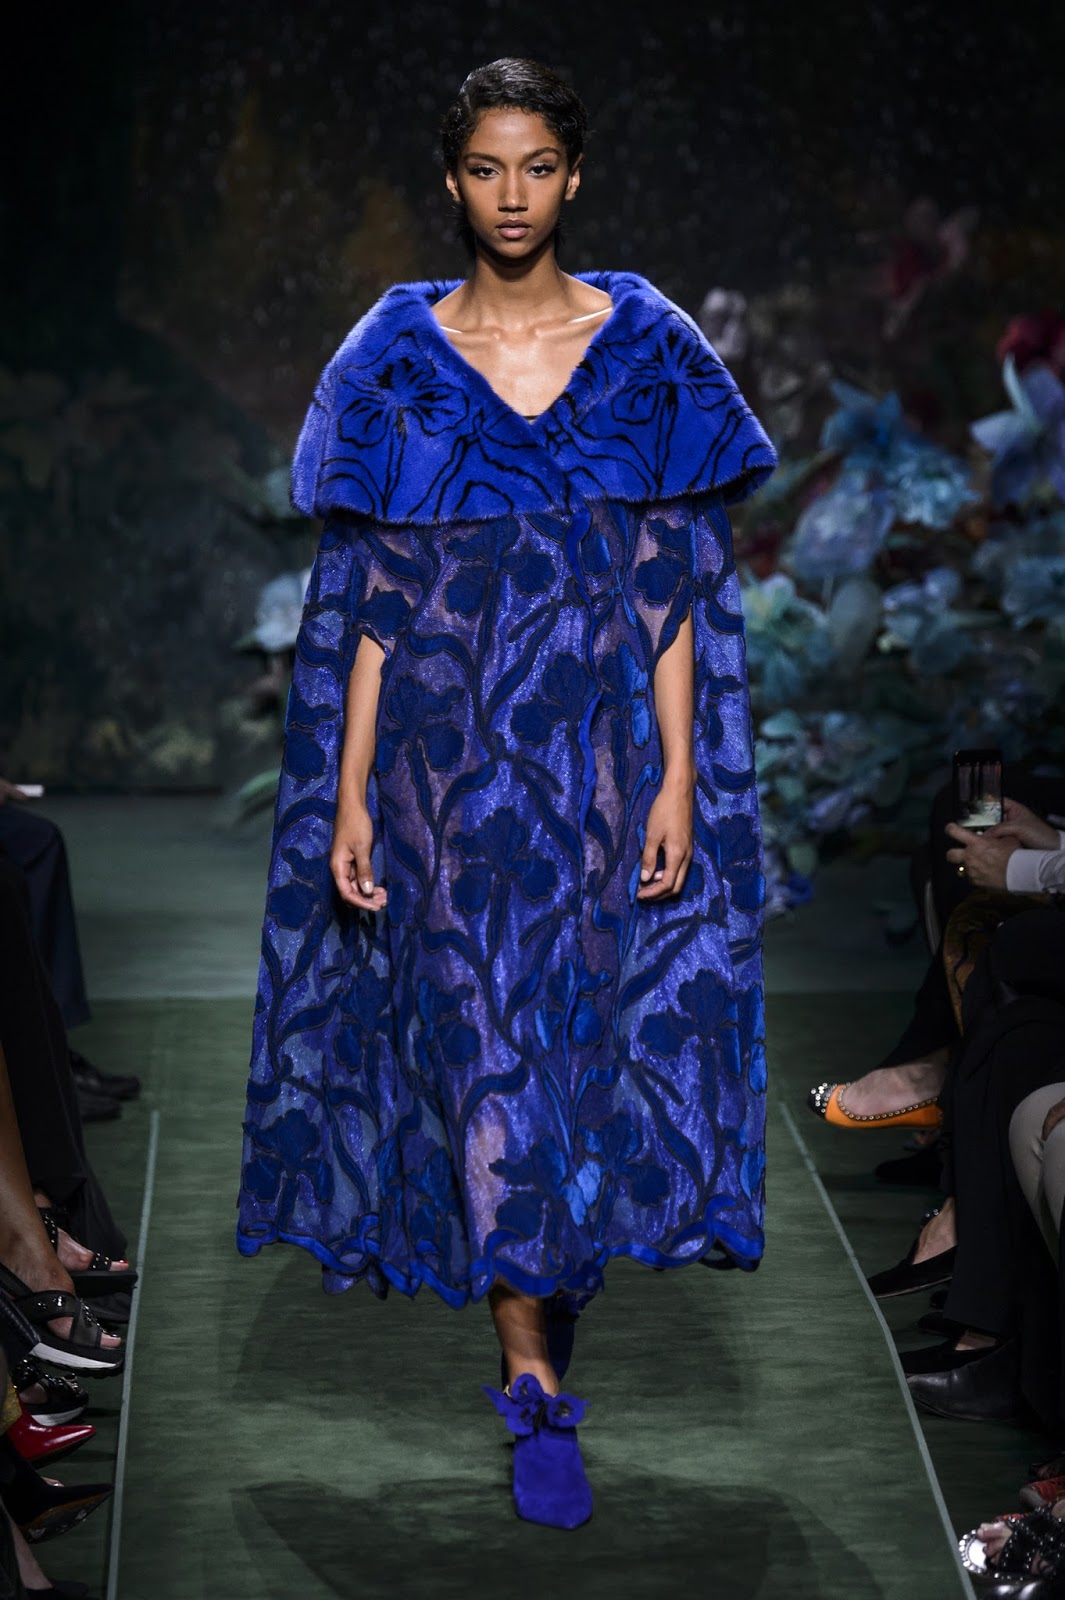 The Couture Blues: FENDI August 20, 2017 | ZsaZsa Bellagio - Like No Other